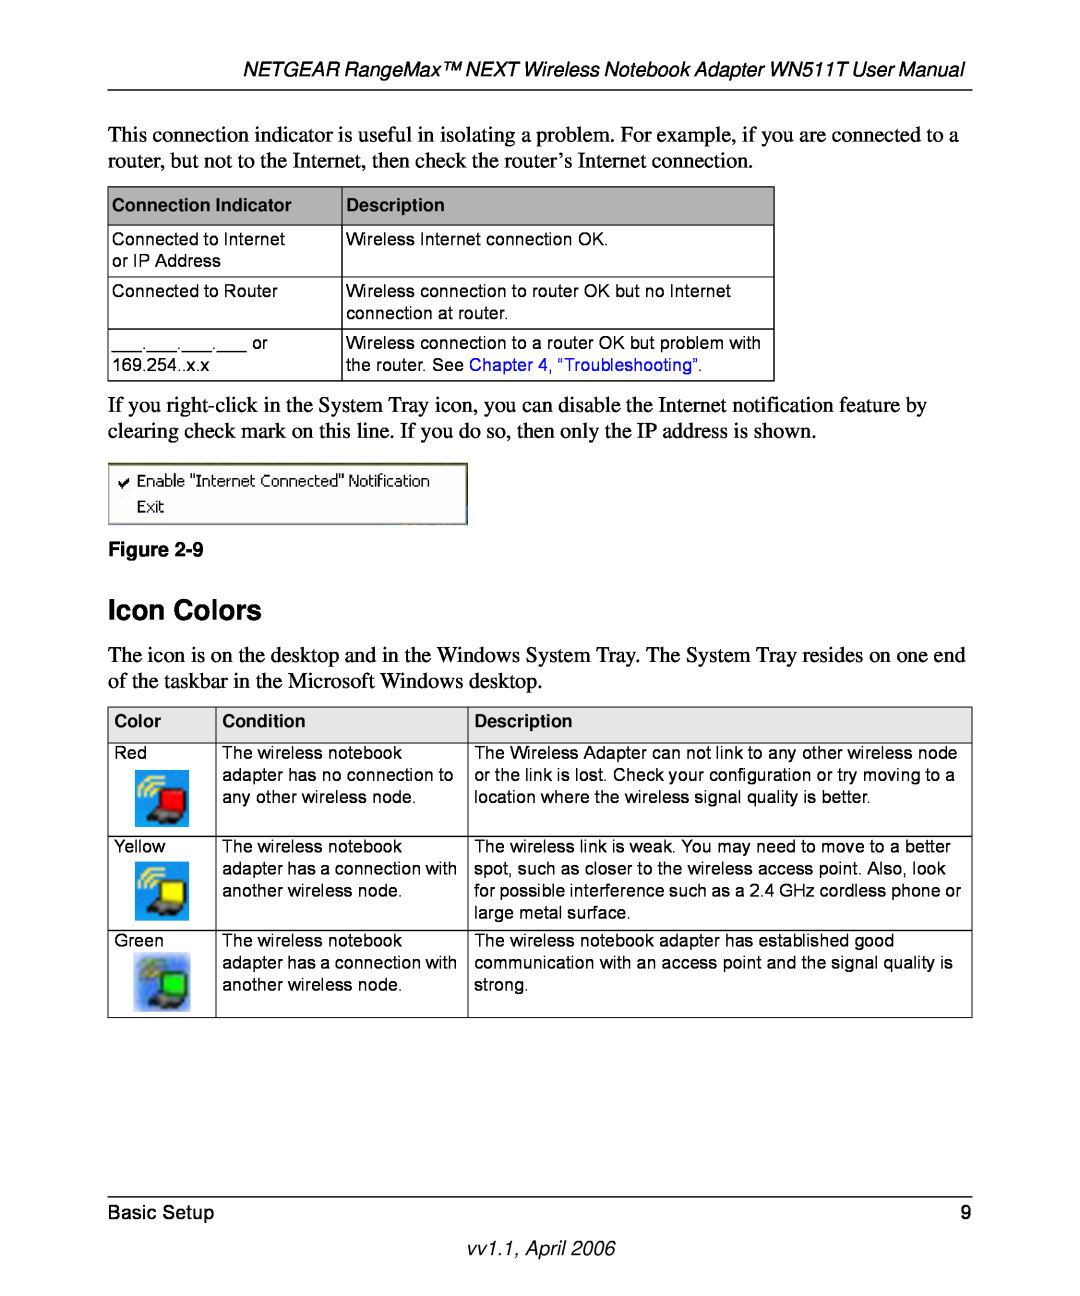 NETGEAR WN511T user manual Icon Colors, the router. See , “Troubleshooting” 